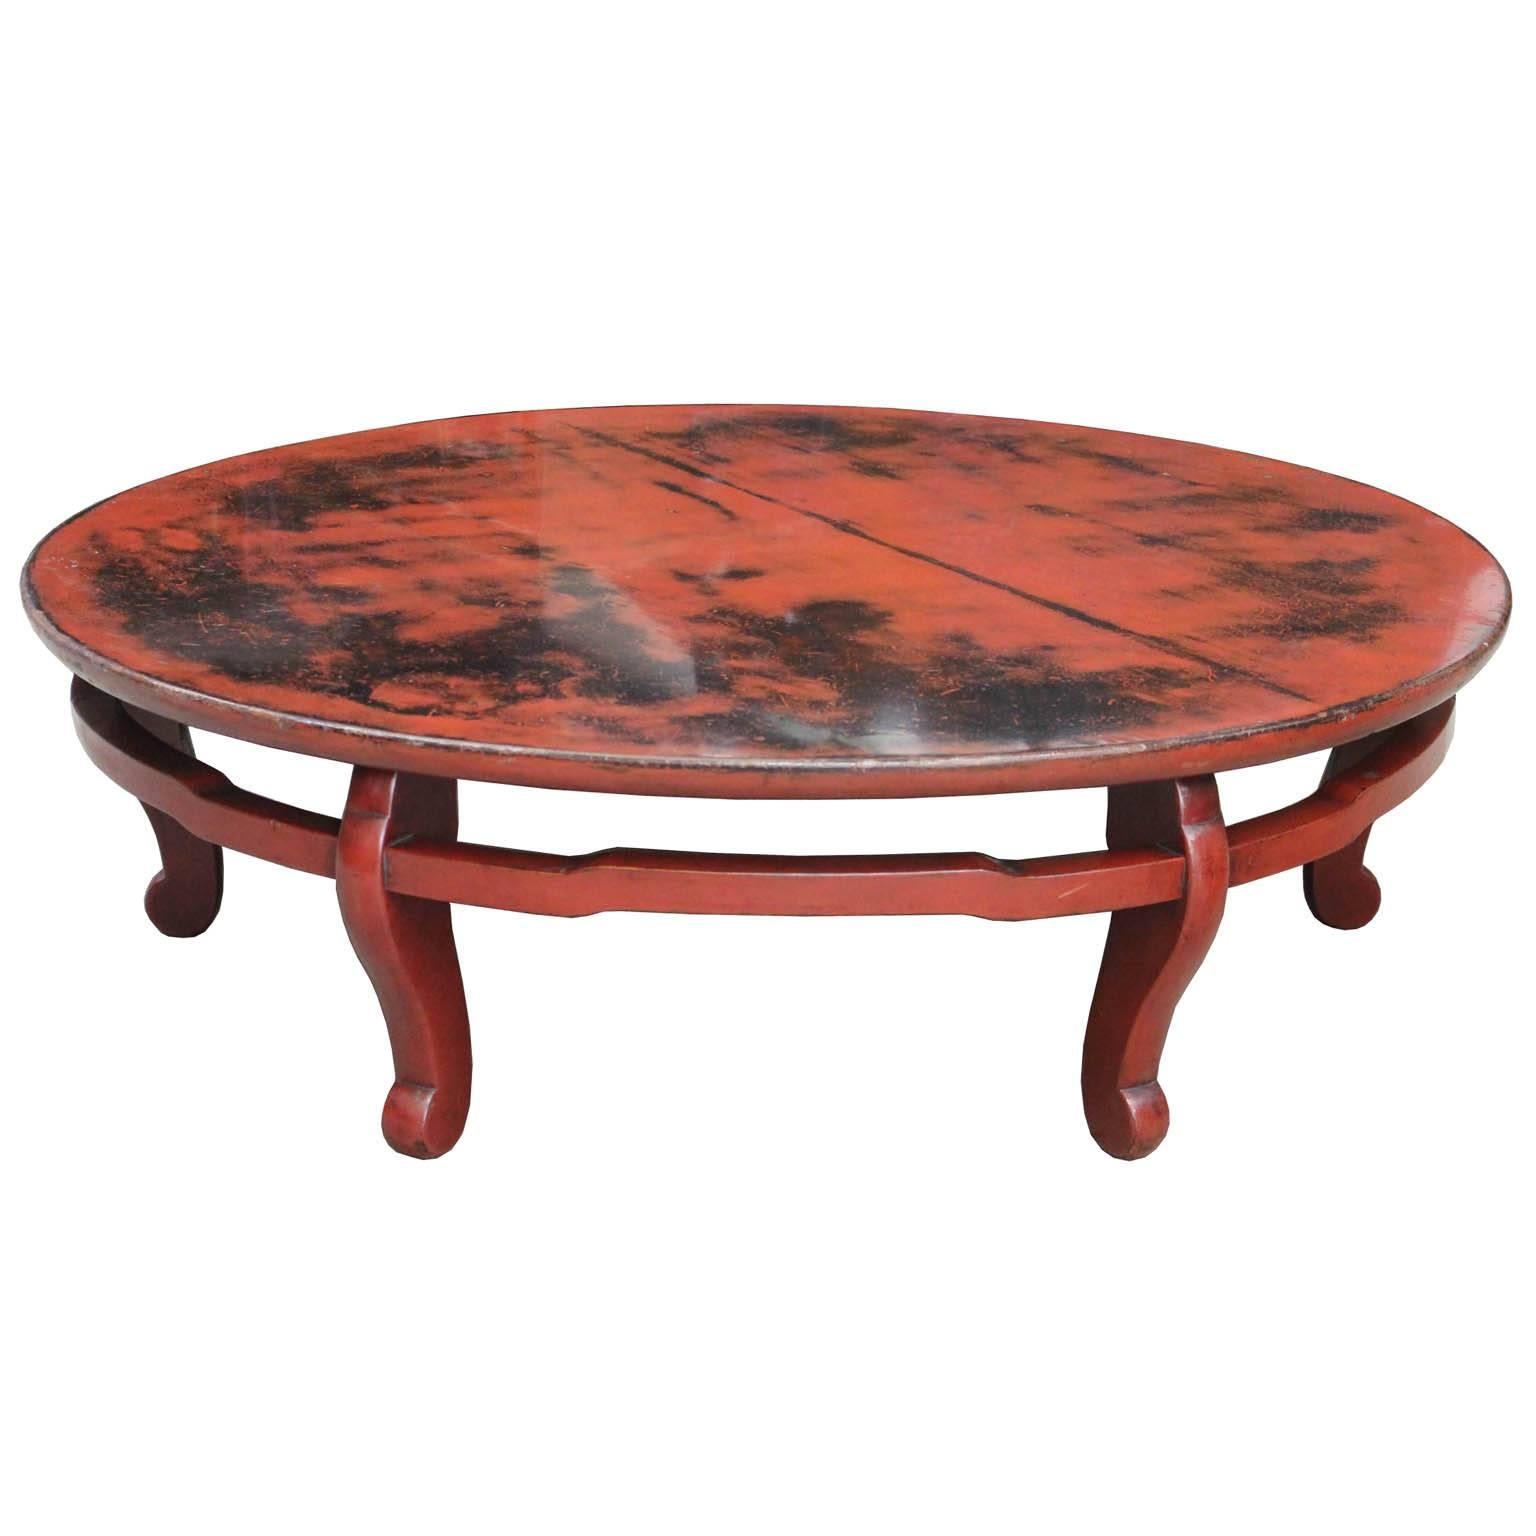 Negoro lacquered low red dining table from Kyoto, Japan would make a beautiful coffee table in a contemporary living room, Meiji period, circa 1870s.
       